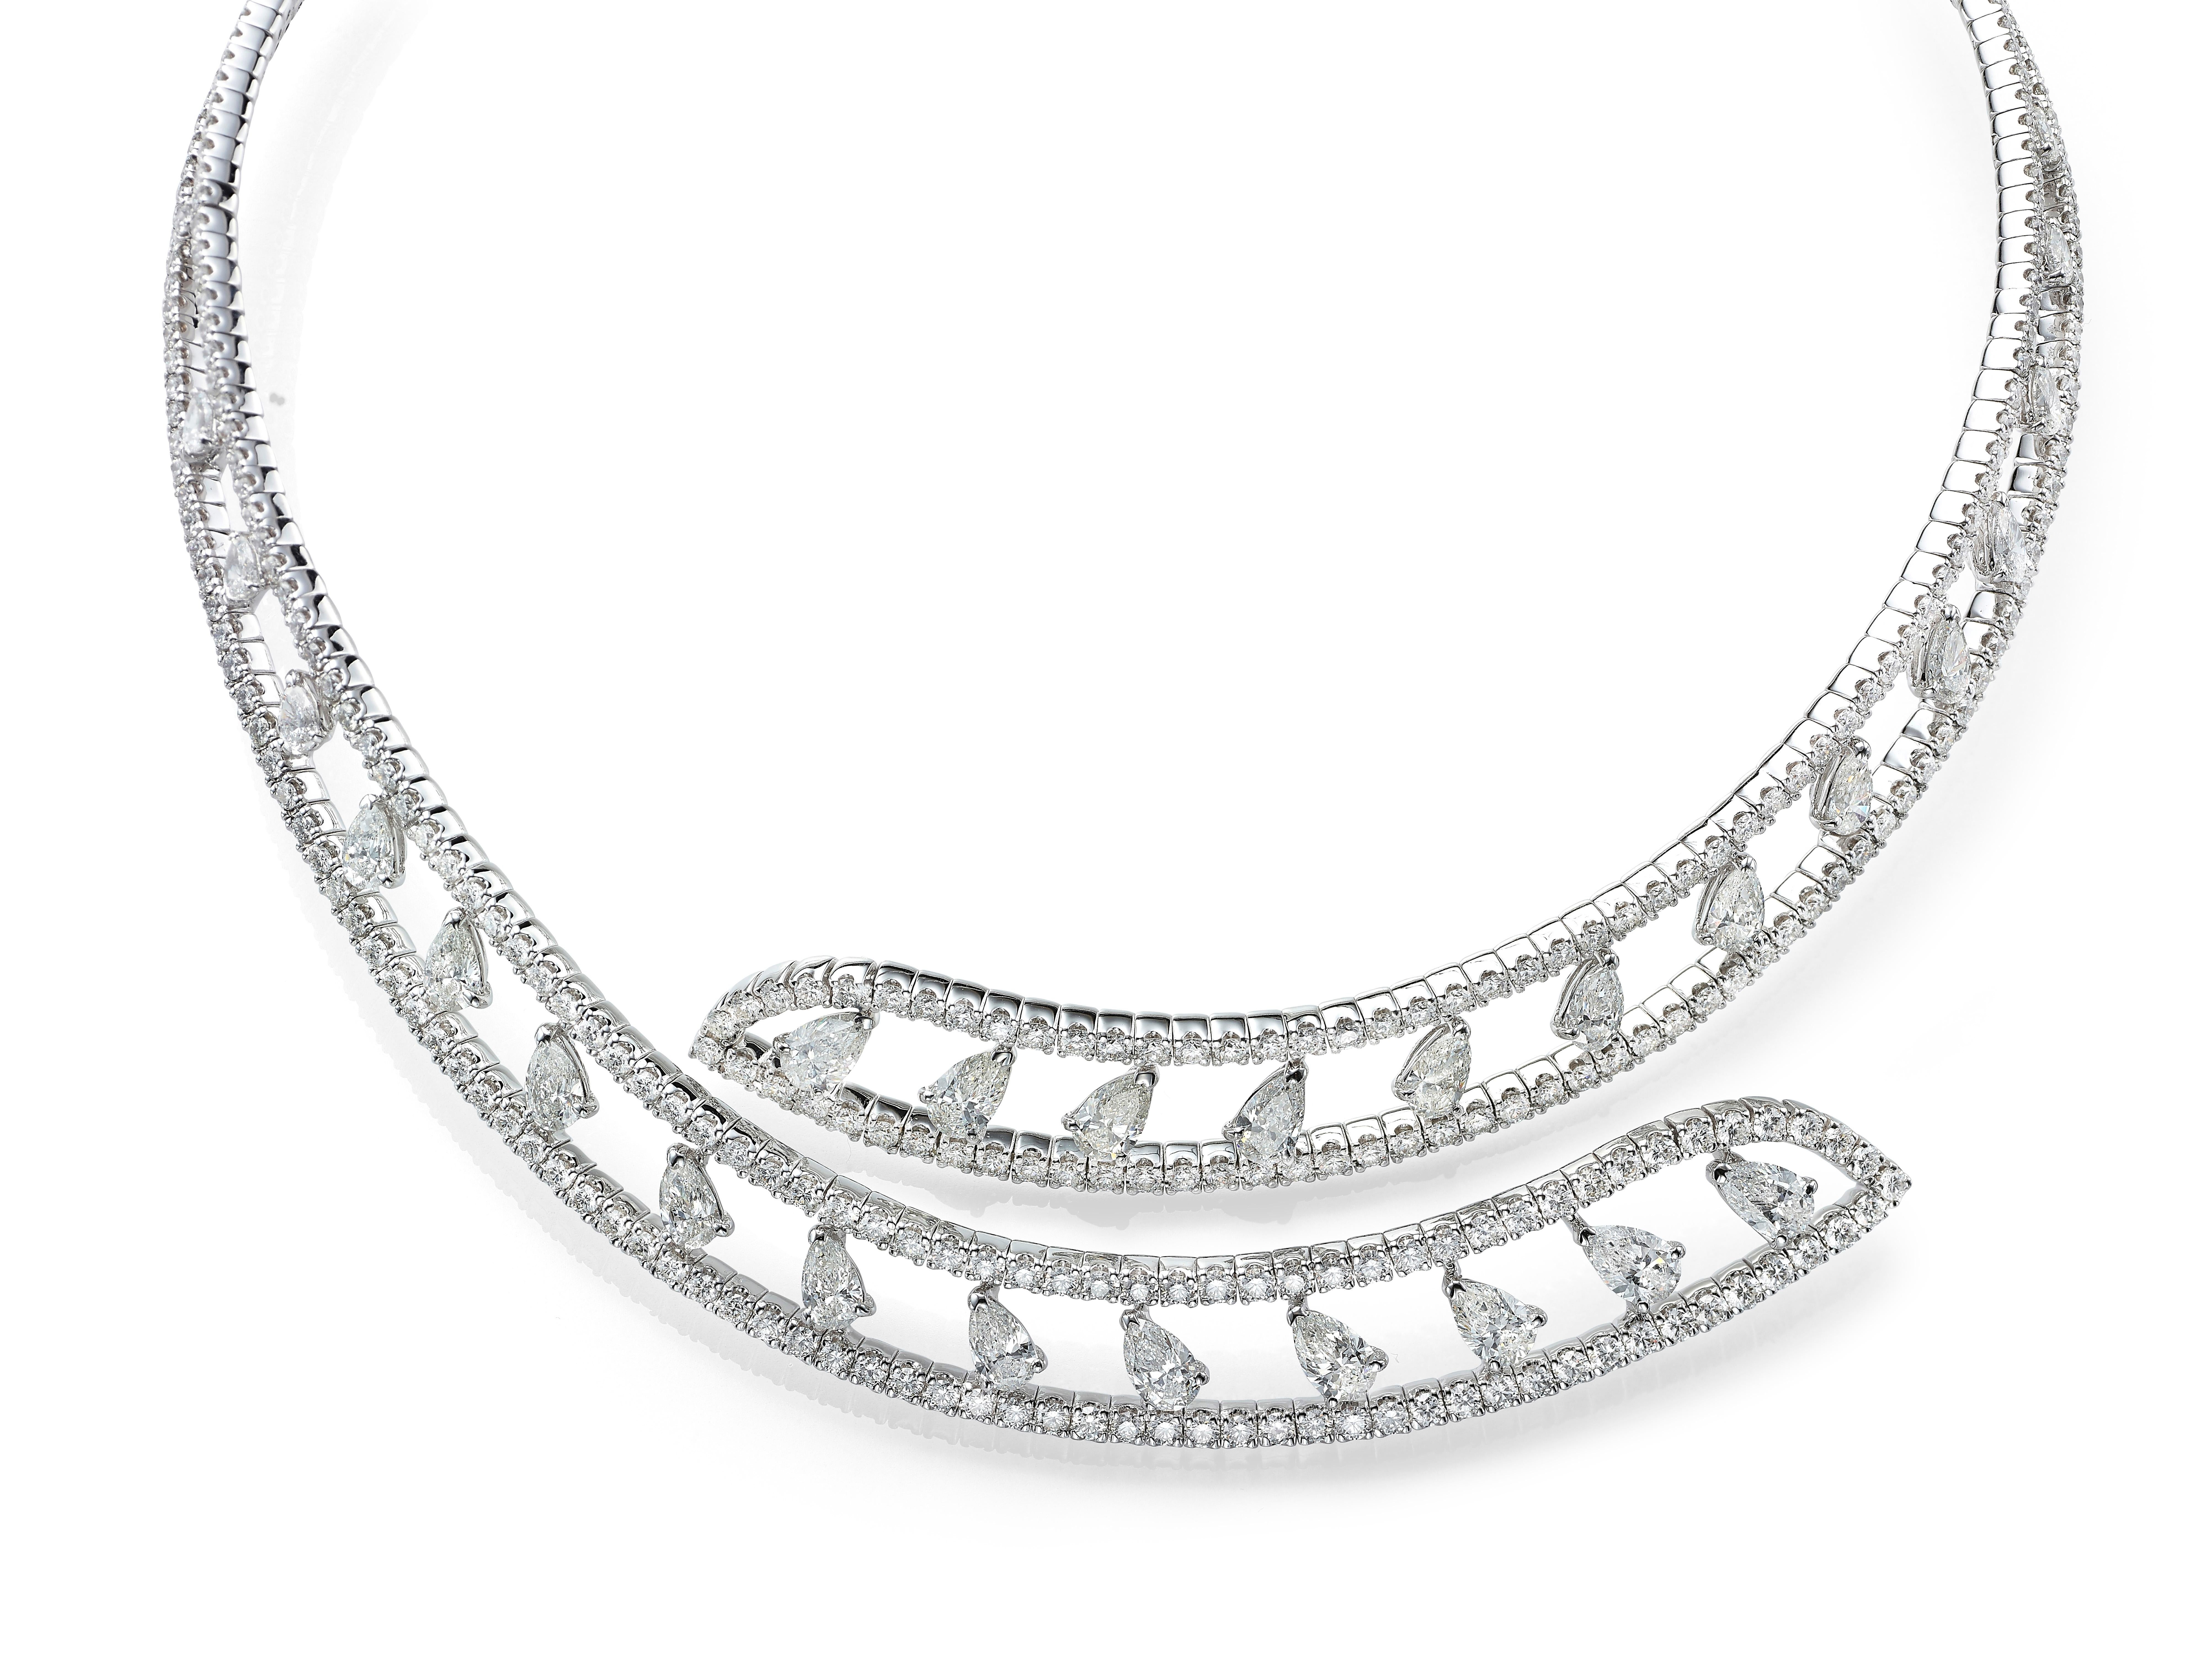 A quintessential piece for special occasions, Butani's open collar choker necklace is skillfully crafted from 18K white gold.  The open bar design is set with 9.06 carats of white pavé  diamonds and punctuated with 27 pear cut diamonds totaling 6.82